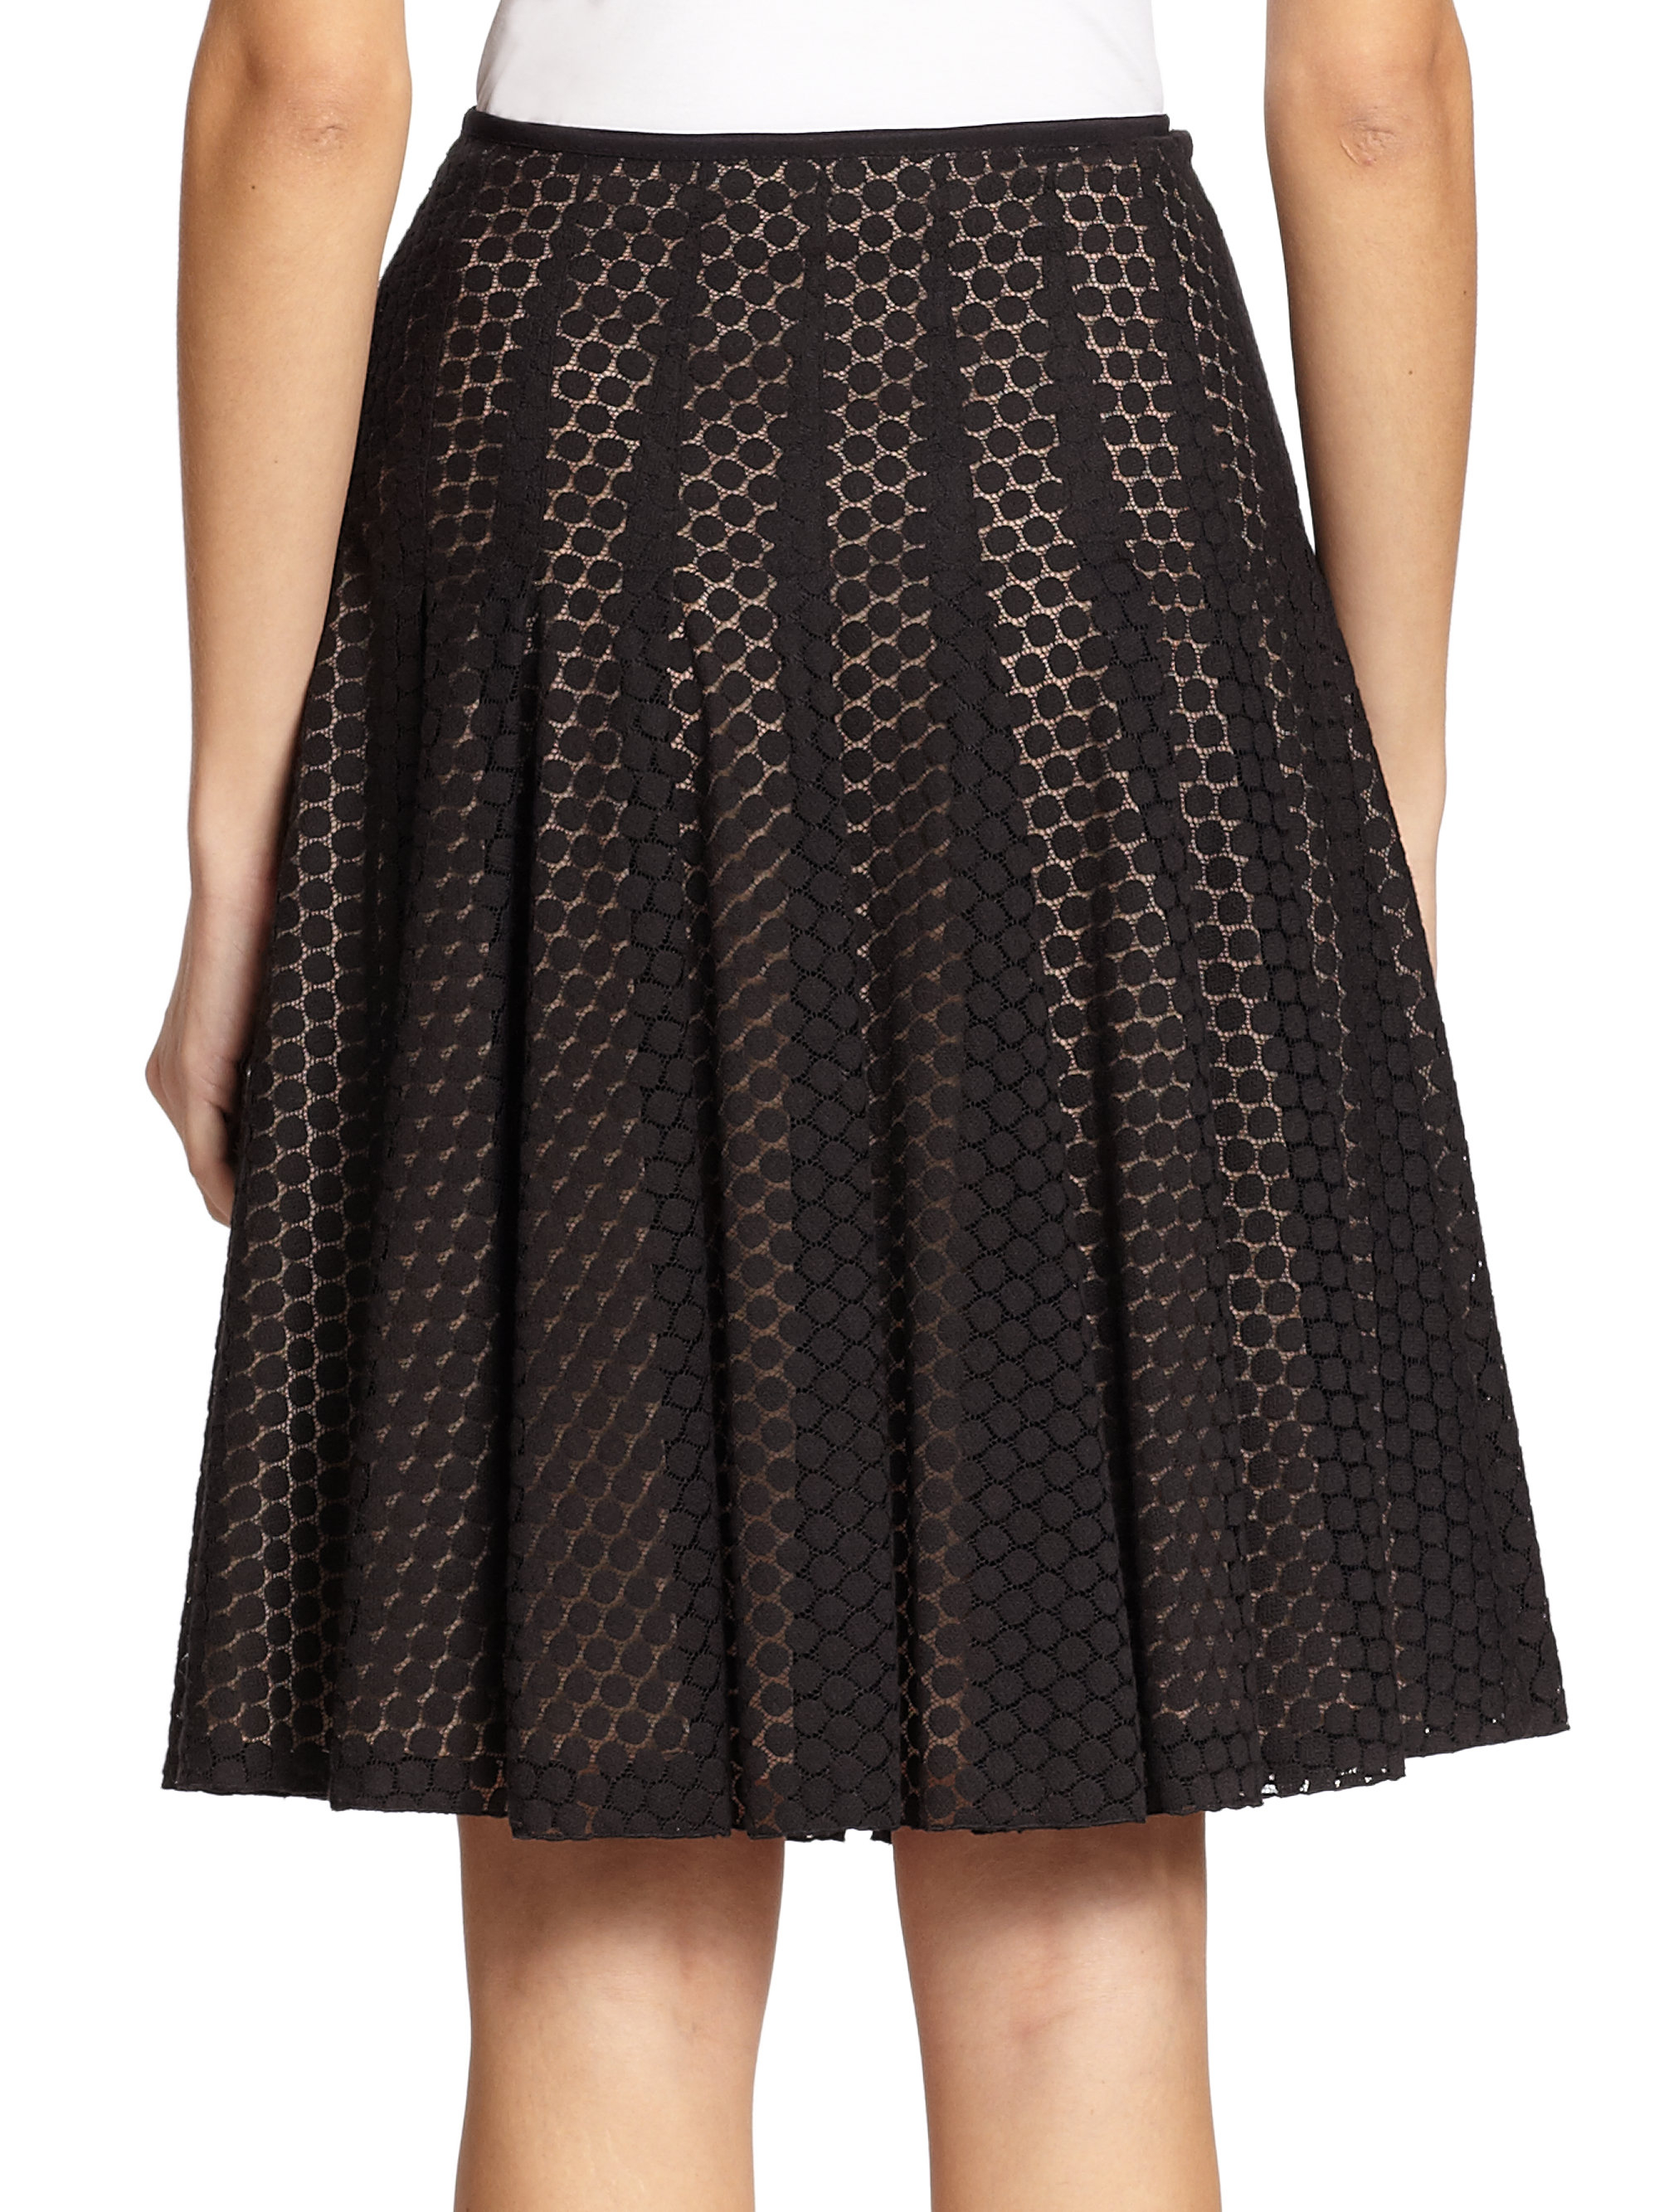 Lyst - Akris Punto Lace Flared Skirt in Black